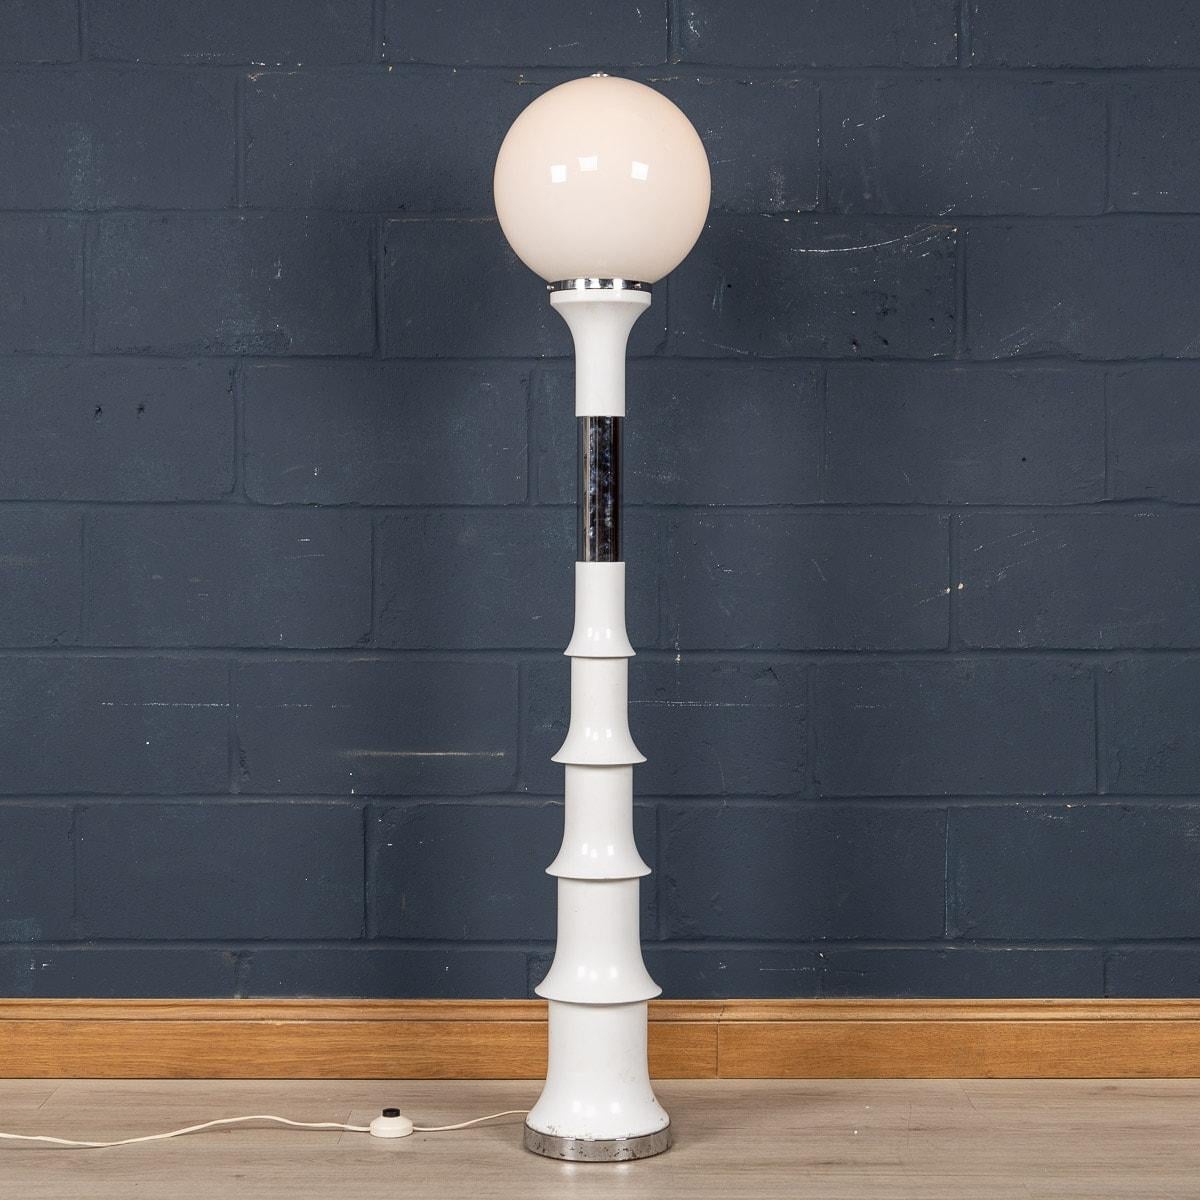 A very rare floor lamp by designed by Enrico Tronconi for Vistosi in Italy, manufactured around the 1970s. The glass illuminating sphere is secured over a bamboo-like metal lacquered frame with chrome detailing. A wonderful piece of midcentury